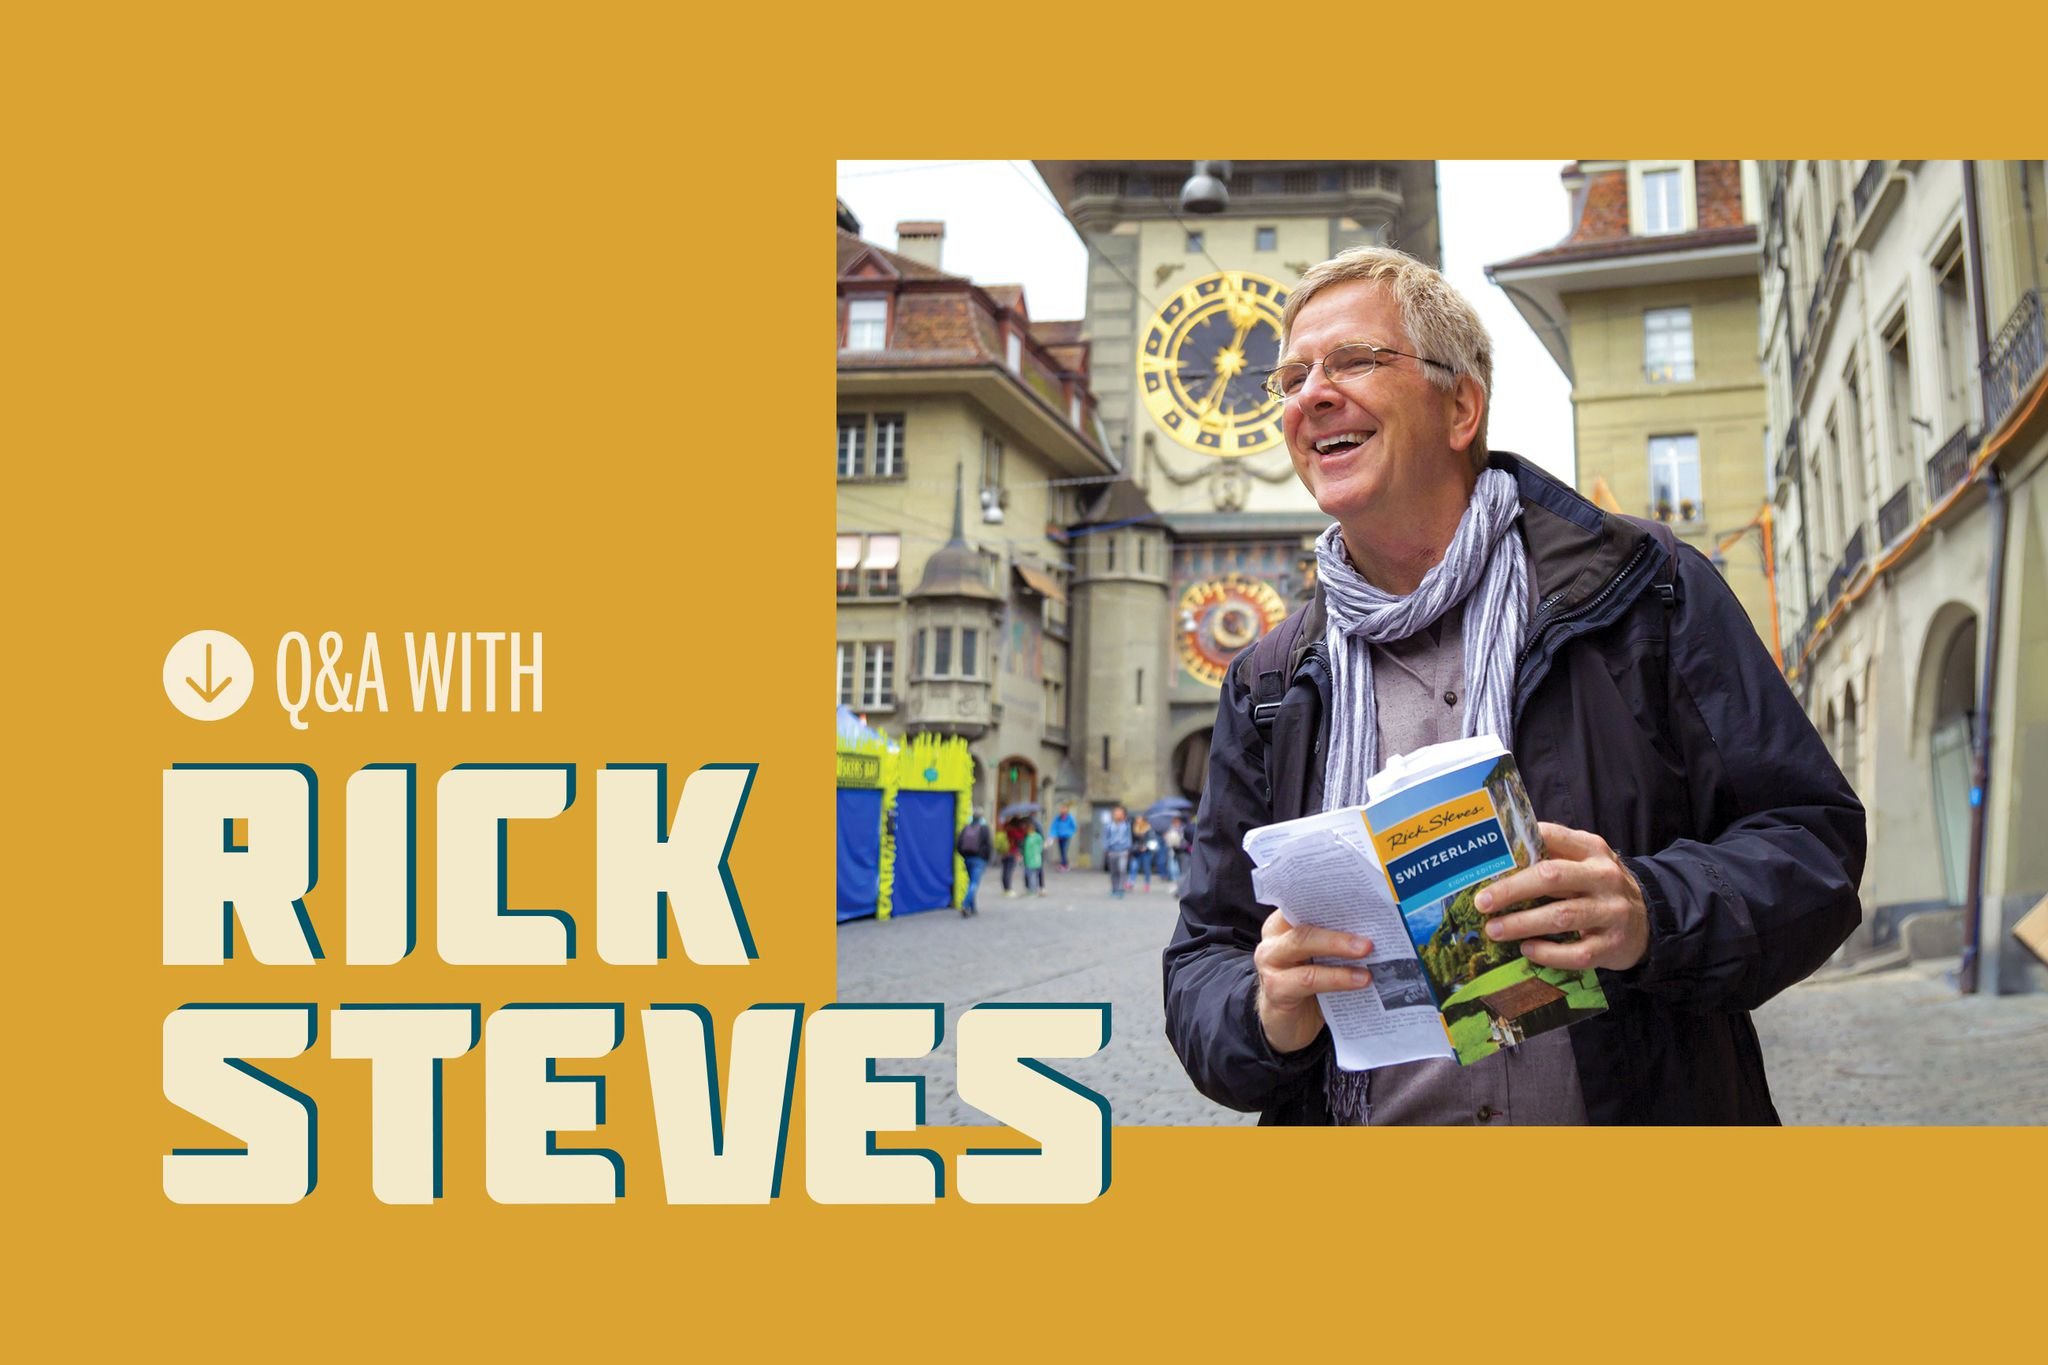 The future according to guidebook writer Rick Steves